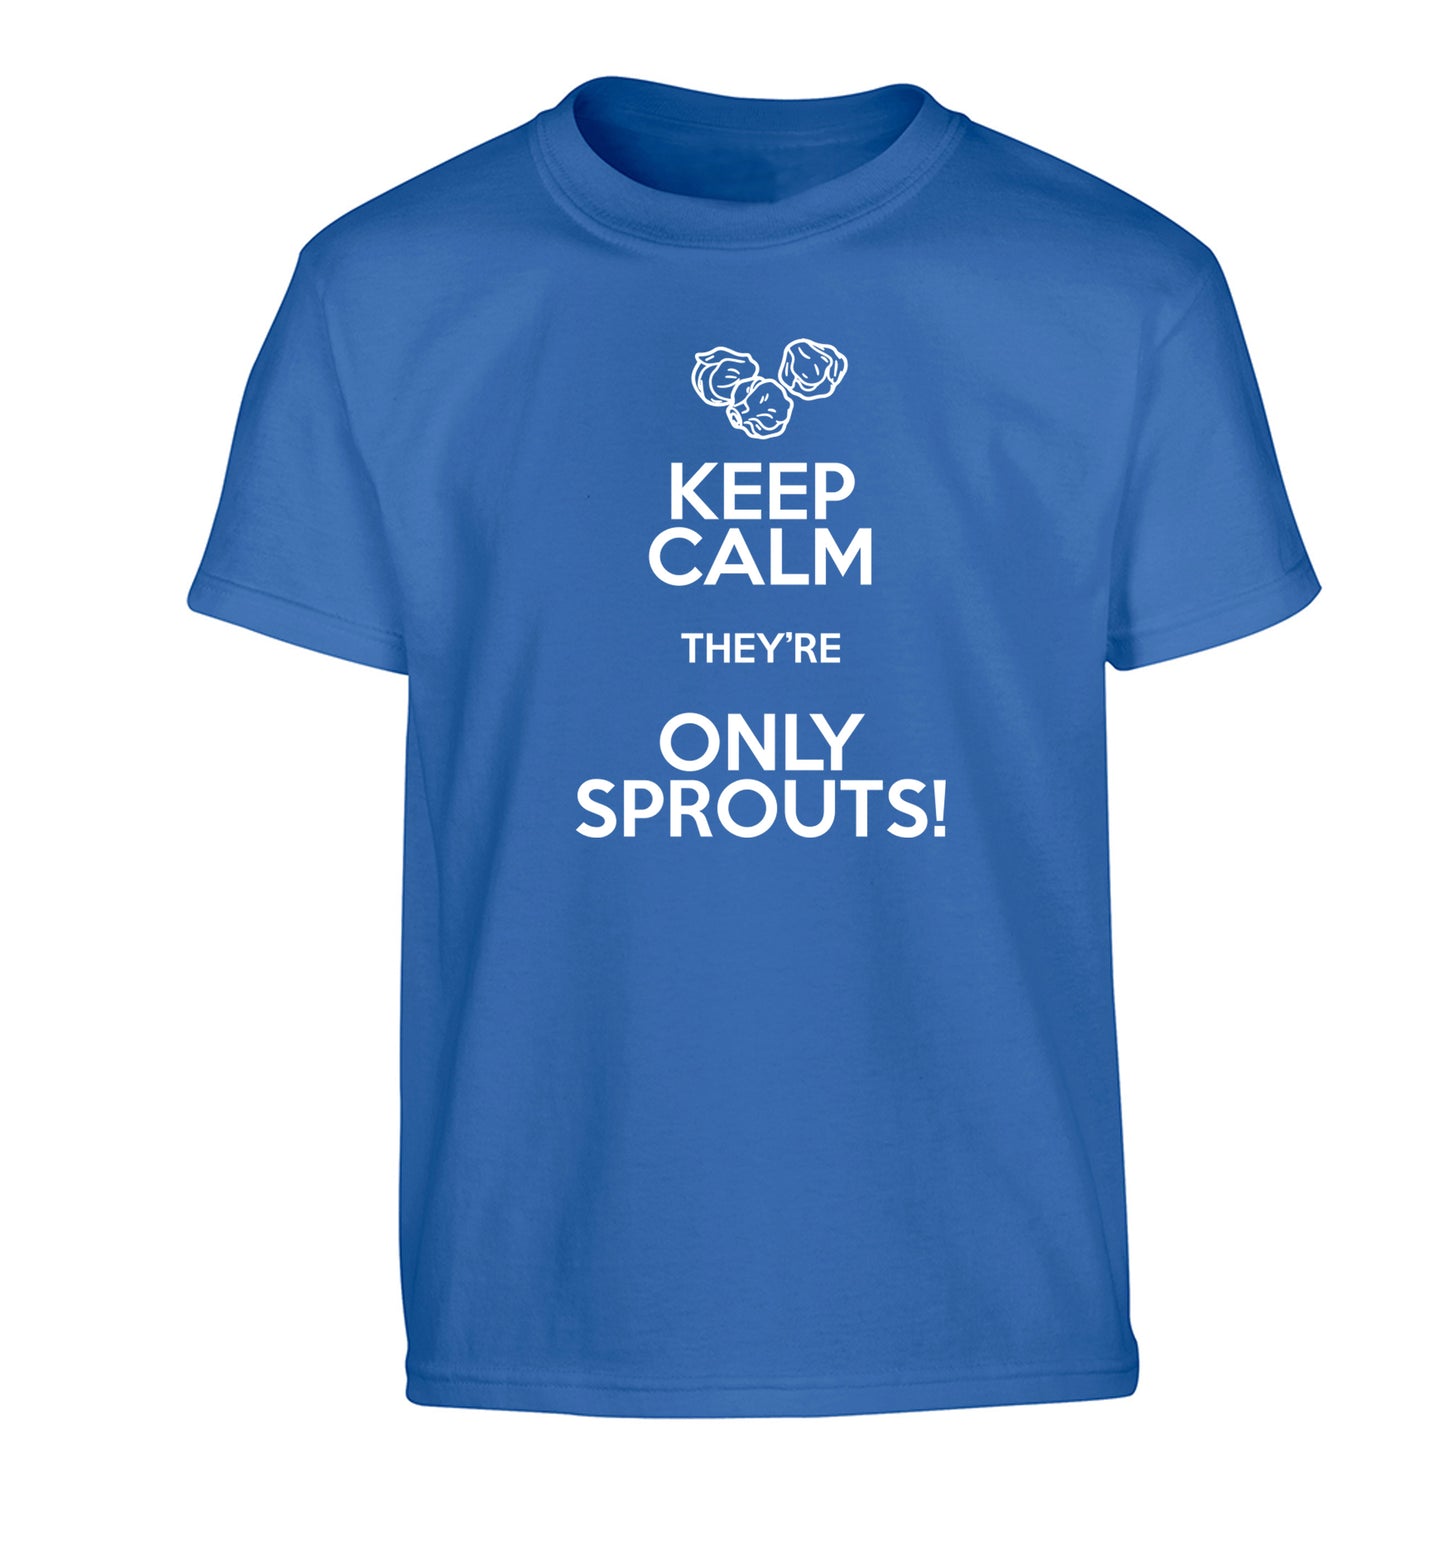 Keep calm they're only sprouts Children's blue Tshirt 12-13 Years